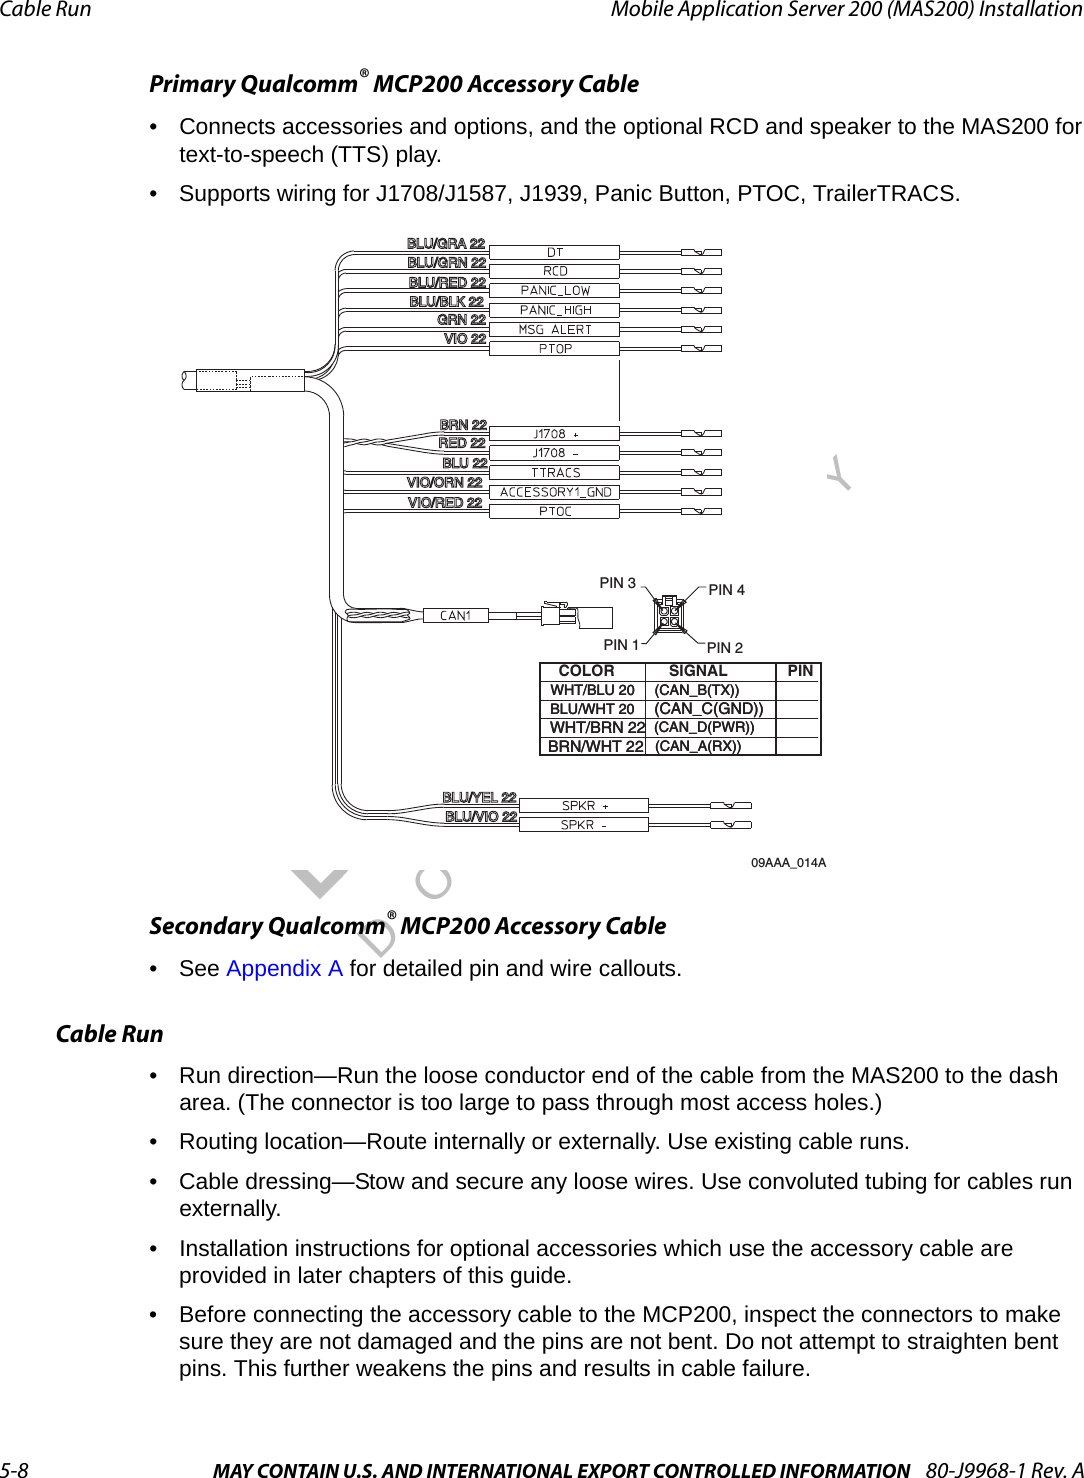 Cable Run Mobile Application Server 200 (MAS200) Installation5-8 MAY CONTAIN U.S. AND INTERNATIONAL EXPORT CONTROLLED INFORMATION 80-J9968-1 Rev. ADO NOT COPYPrimary Qualcomm® MCP200 Accessory Cable• Connects accessories and options, and the optional RCD and speaker to the MAS200 for text-to-speech (TTS) play.• Supports wiring for J1708/J1587, J1939, Panic Button, PTOC, TrailerTRACS.Secondary Qualcomm® MCP200 Accessory Cable• See Appendix A for detailed pin and wire callouts.Cable Run• Run direction—Run the loose conductor end of the cable from the MAS200 to the dash area. (The connector is too large to pass through most access holes.)• Routing location—Route internally or externally. Use existing cable runs.• Cable dressing—Stow and secure any loose wires. Use convoluted tubing for cables run externally.• Installation instructions for optional accessories which use the accessory cable are provided in later chapters of this guide.• Before connecting the accessory cable to the MCP200, inspect the connectors to make sure they are not damaged and the pins are not bent. Do not attempt to straighten bent pins. This further weakens the pins and results in cable failure.09AAA_014AWHT/BLU 20WHT/BLU 20BLU/WHT 20BLU/WHT 20GRN 22GRN 22GRN 22RED 22RED 22RED 22BRN 22BRN 22BRN 22BLU/BLK 22BLU/BLK 22BLU/BLK 22BLU/RED 22BLU/RED 22BLU/RED 22BLU 22BLU 22BLU 22VIO/ORN 22VIO/ORN 22VIO/ORN 22VIO/RED 22VIO/RED 22VIO/RED 22BLU/GRN 22BLU/GRN 22BLU/GRN 22VIO 22VIO 22VIO 22BLU/YEL 22BLU/YEL 22BLU/YEL 22BLU/VIO 22BLU/VIO 22BLU/VIO 22BLU/GRA 22BLU/GRA 22BLU/GRA 22(CAN_D(PWR))(CAN_D(PWR))(CAN_A(RX))(CAN_A(RX))PIN 3PIN 1PIN 4PIN 2WHT/BRN 22WHT/BRN 22BRN/WHT 22BRN/WHT 22(CAN_B(TX))(CAN_B(TX))(CAN_C(GND))(CAN_C(GND))PINSIGNALCOLOR